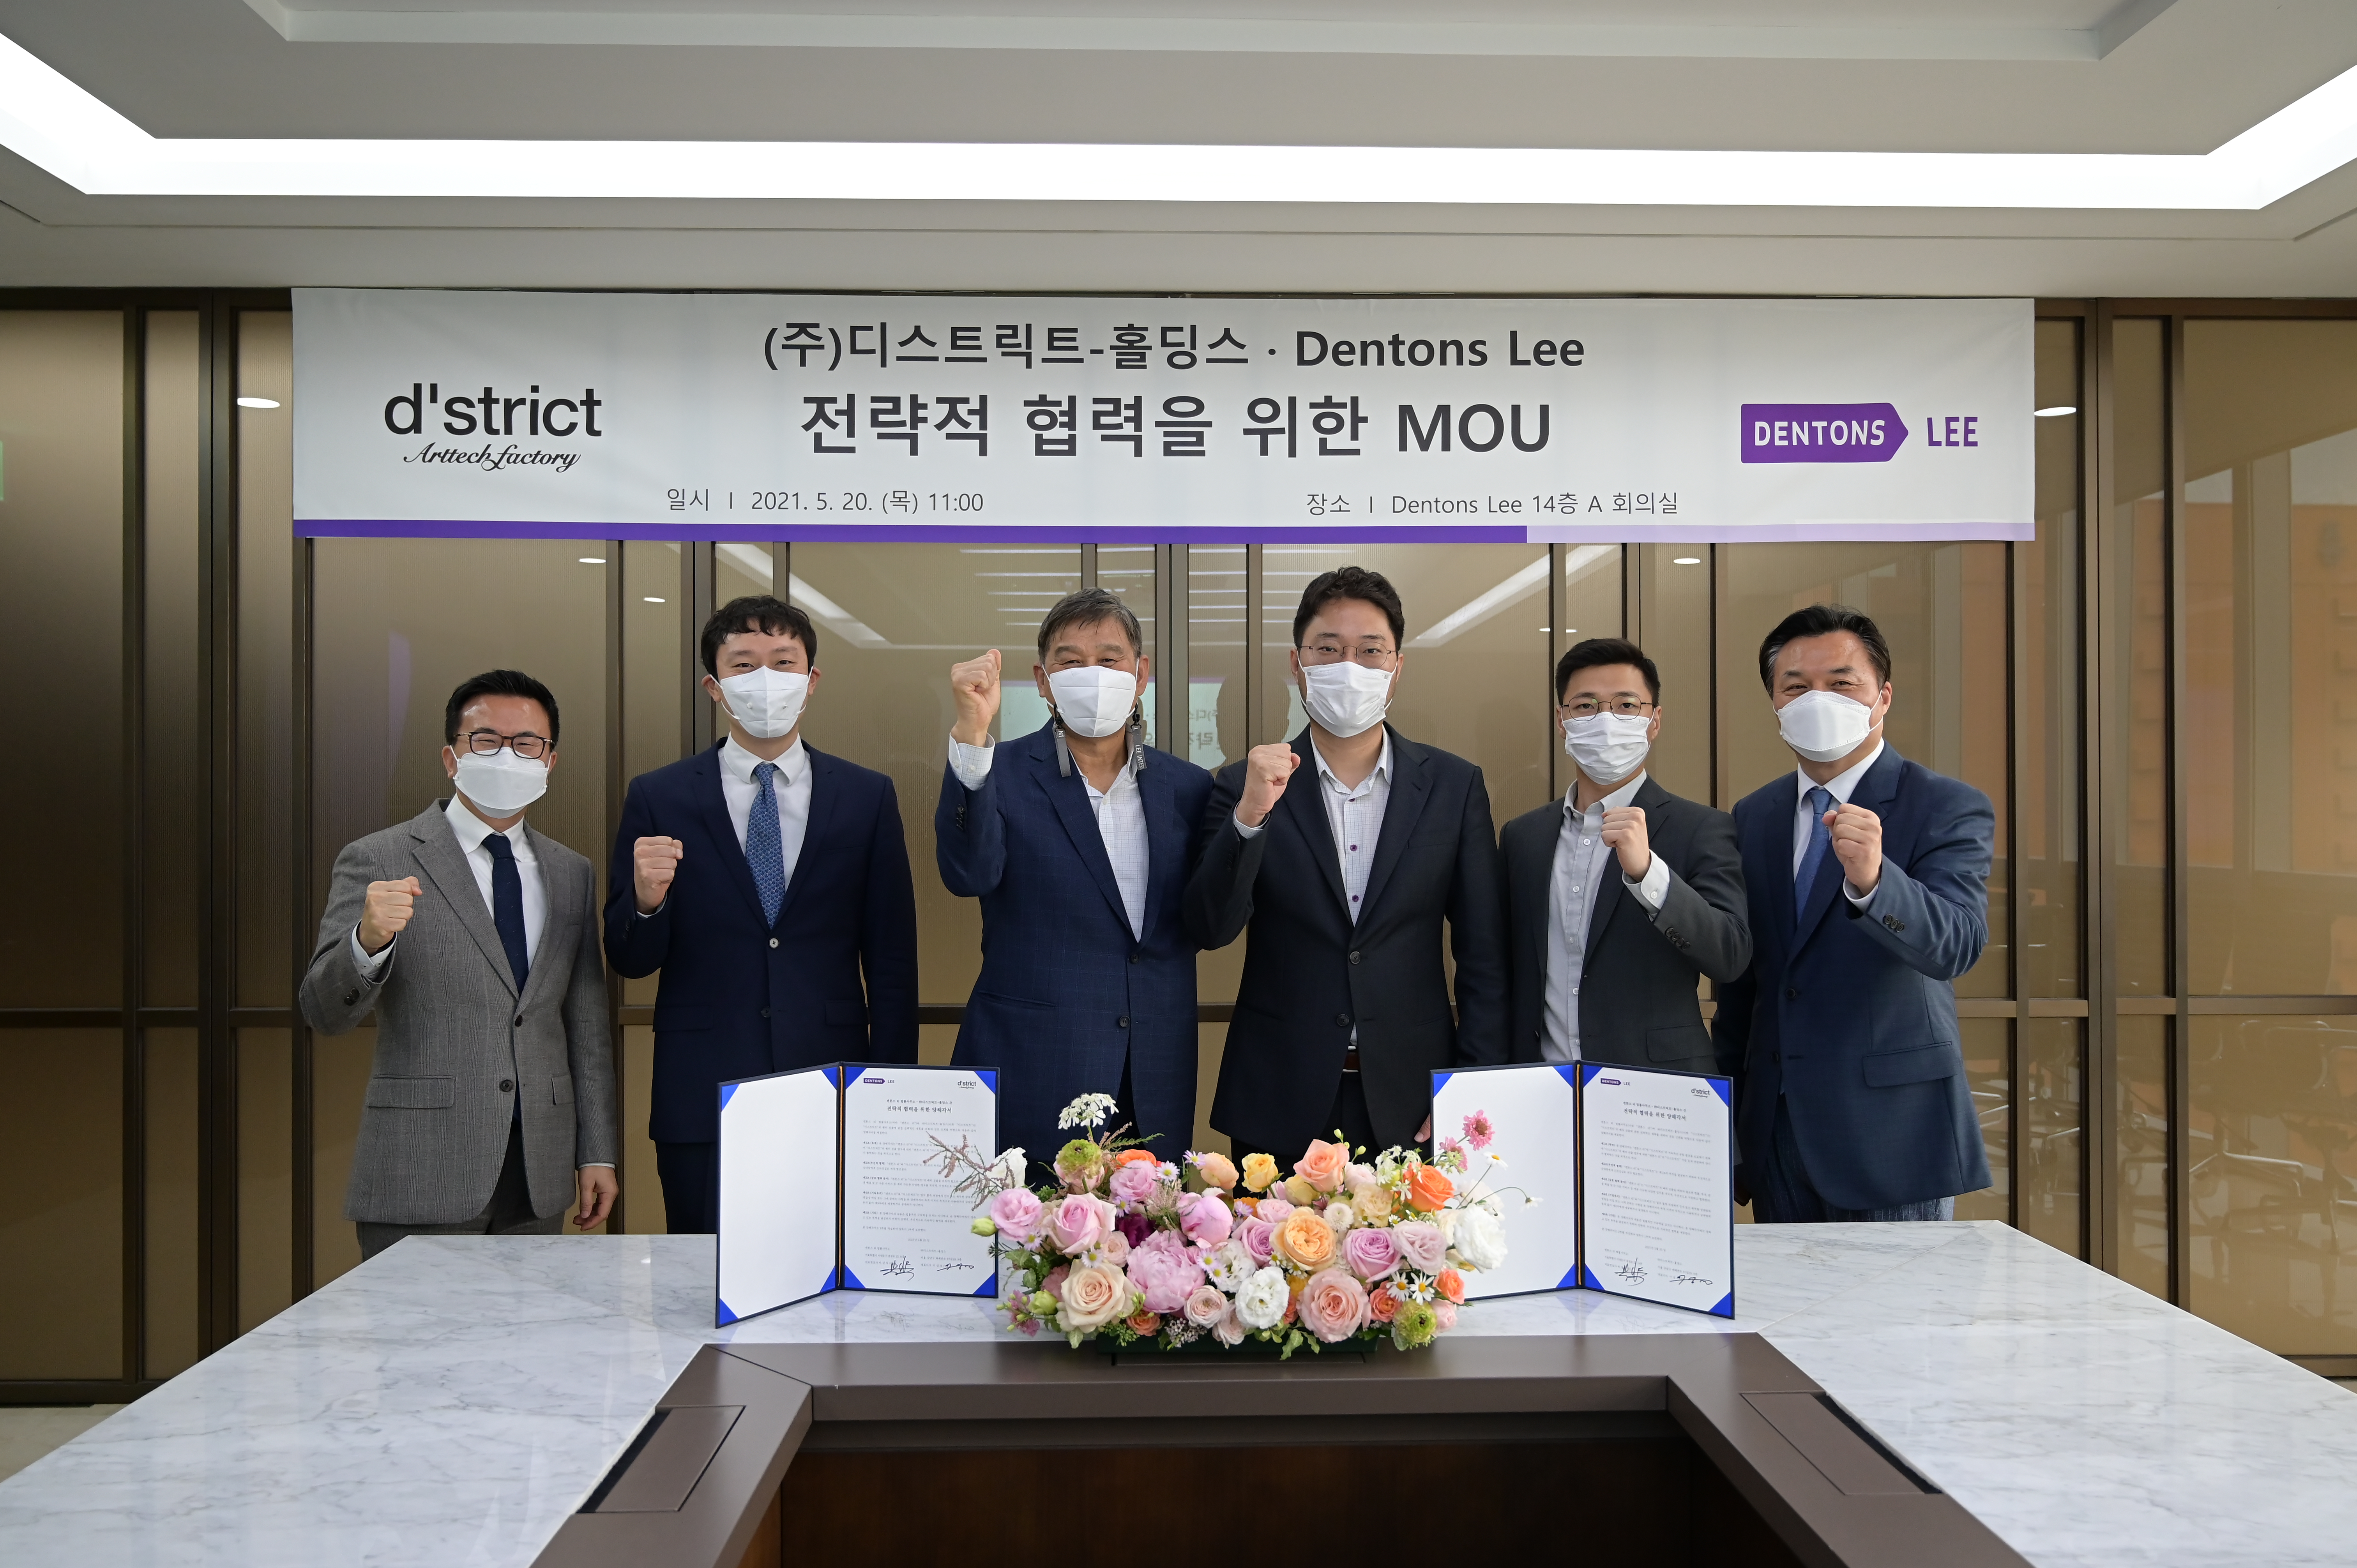 Dentons Lee MOU with d'istrict holdings, INC.